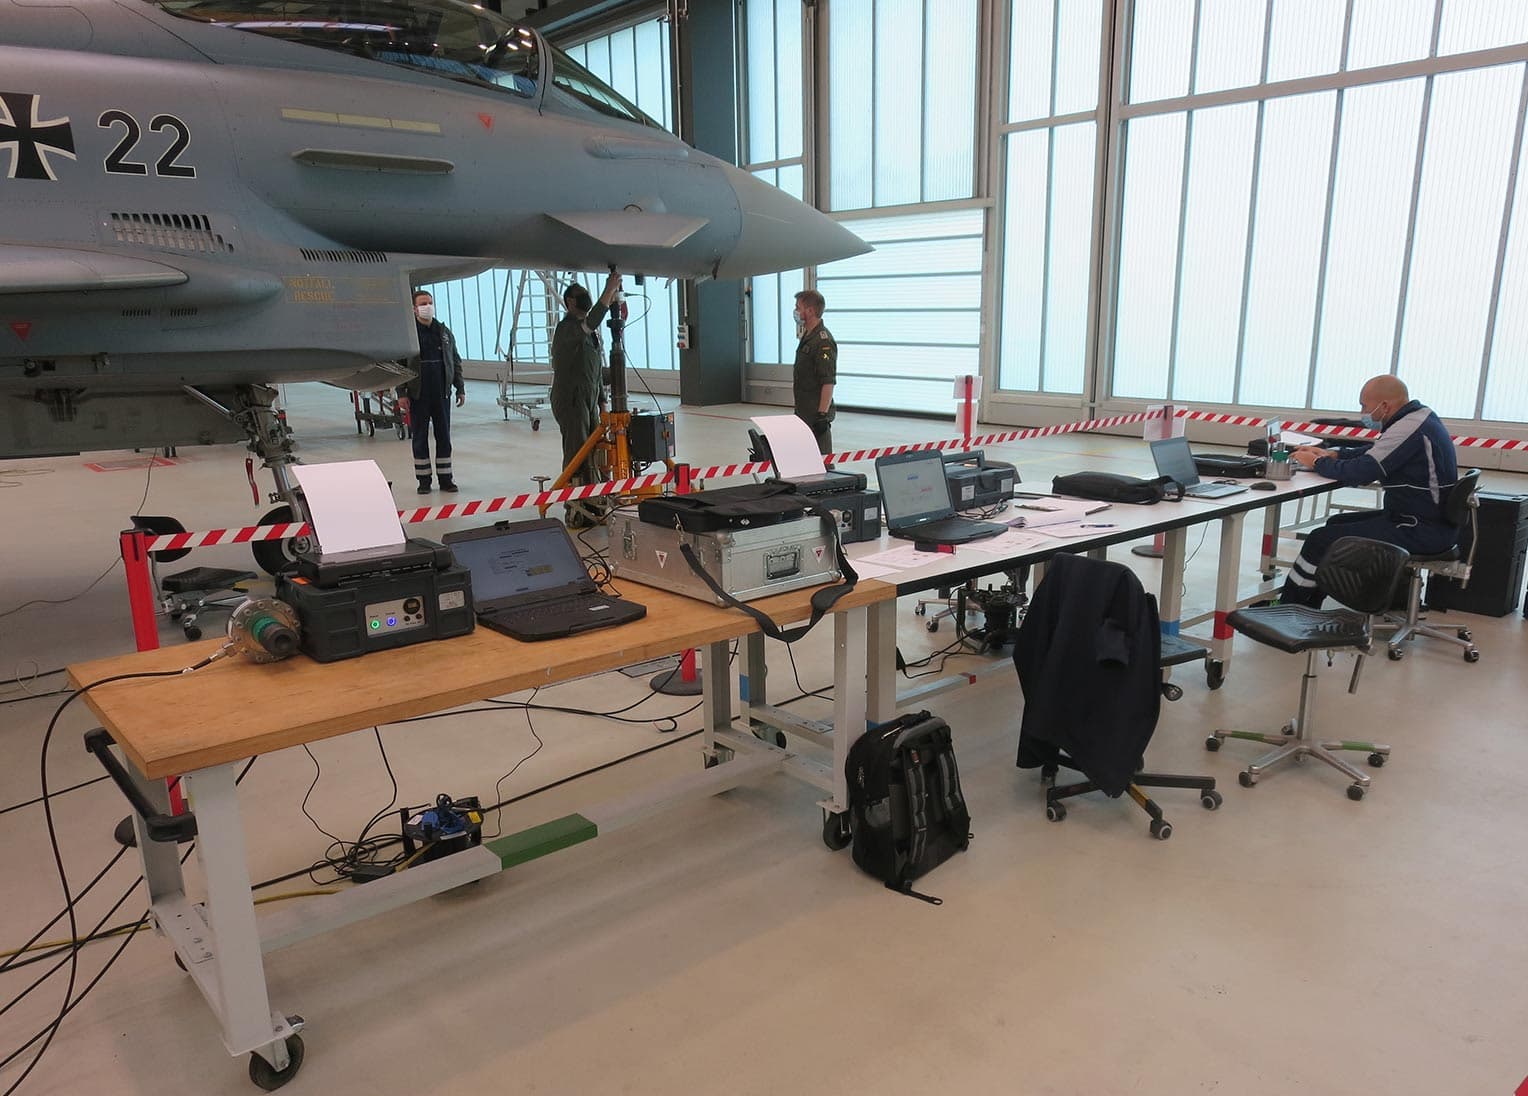 Airbus In-Service Support System acceptance campaign